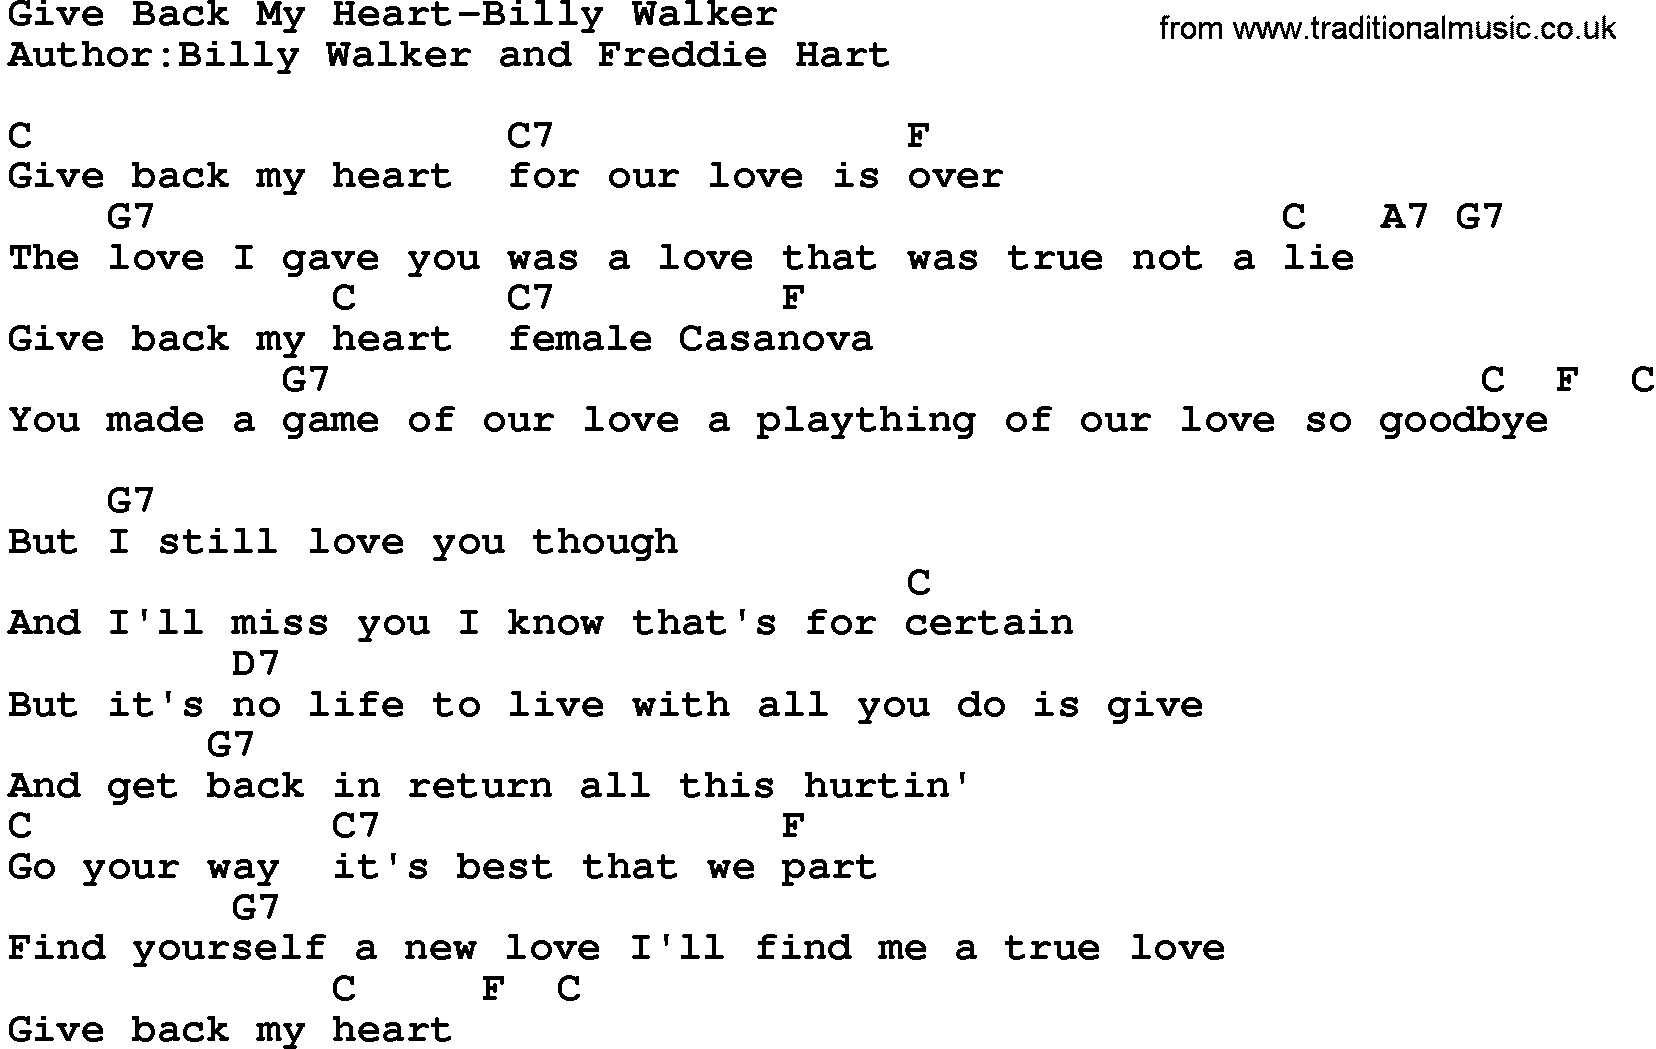 Country music song: Give Back My Heart-Billy Walker lyrics and chords